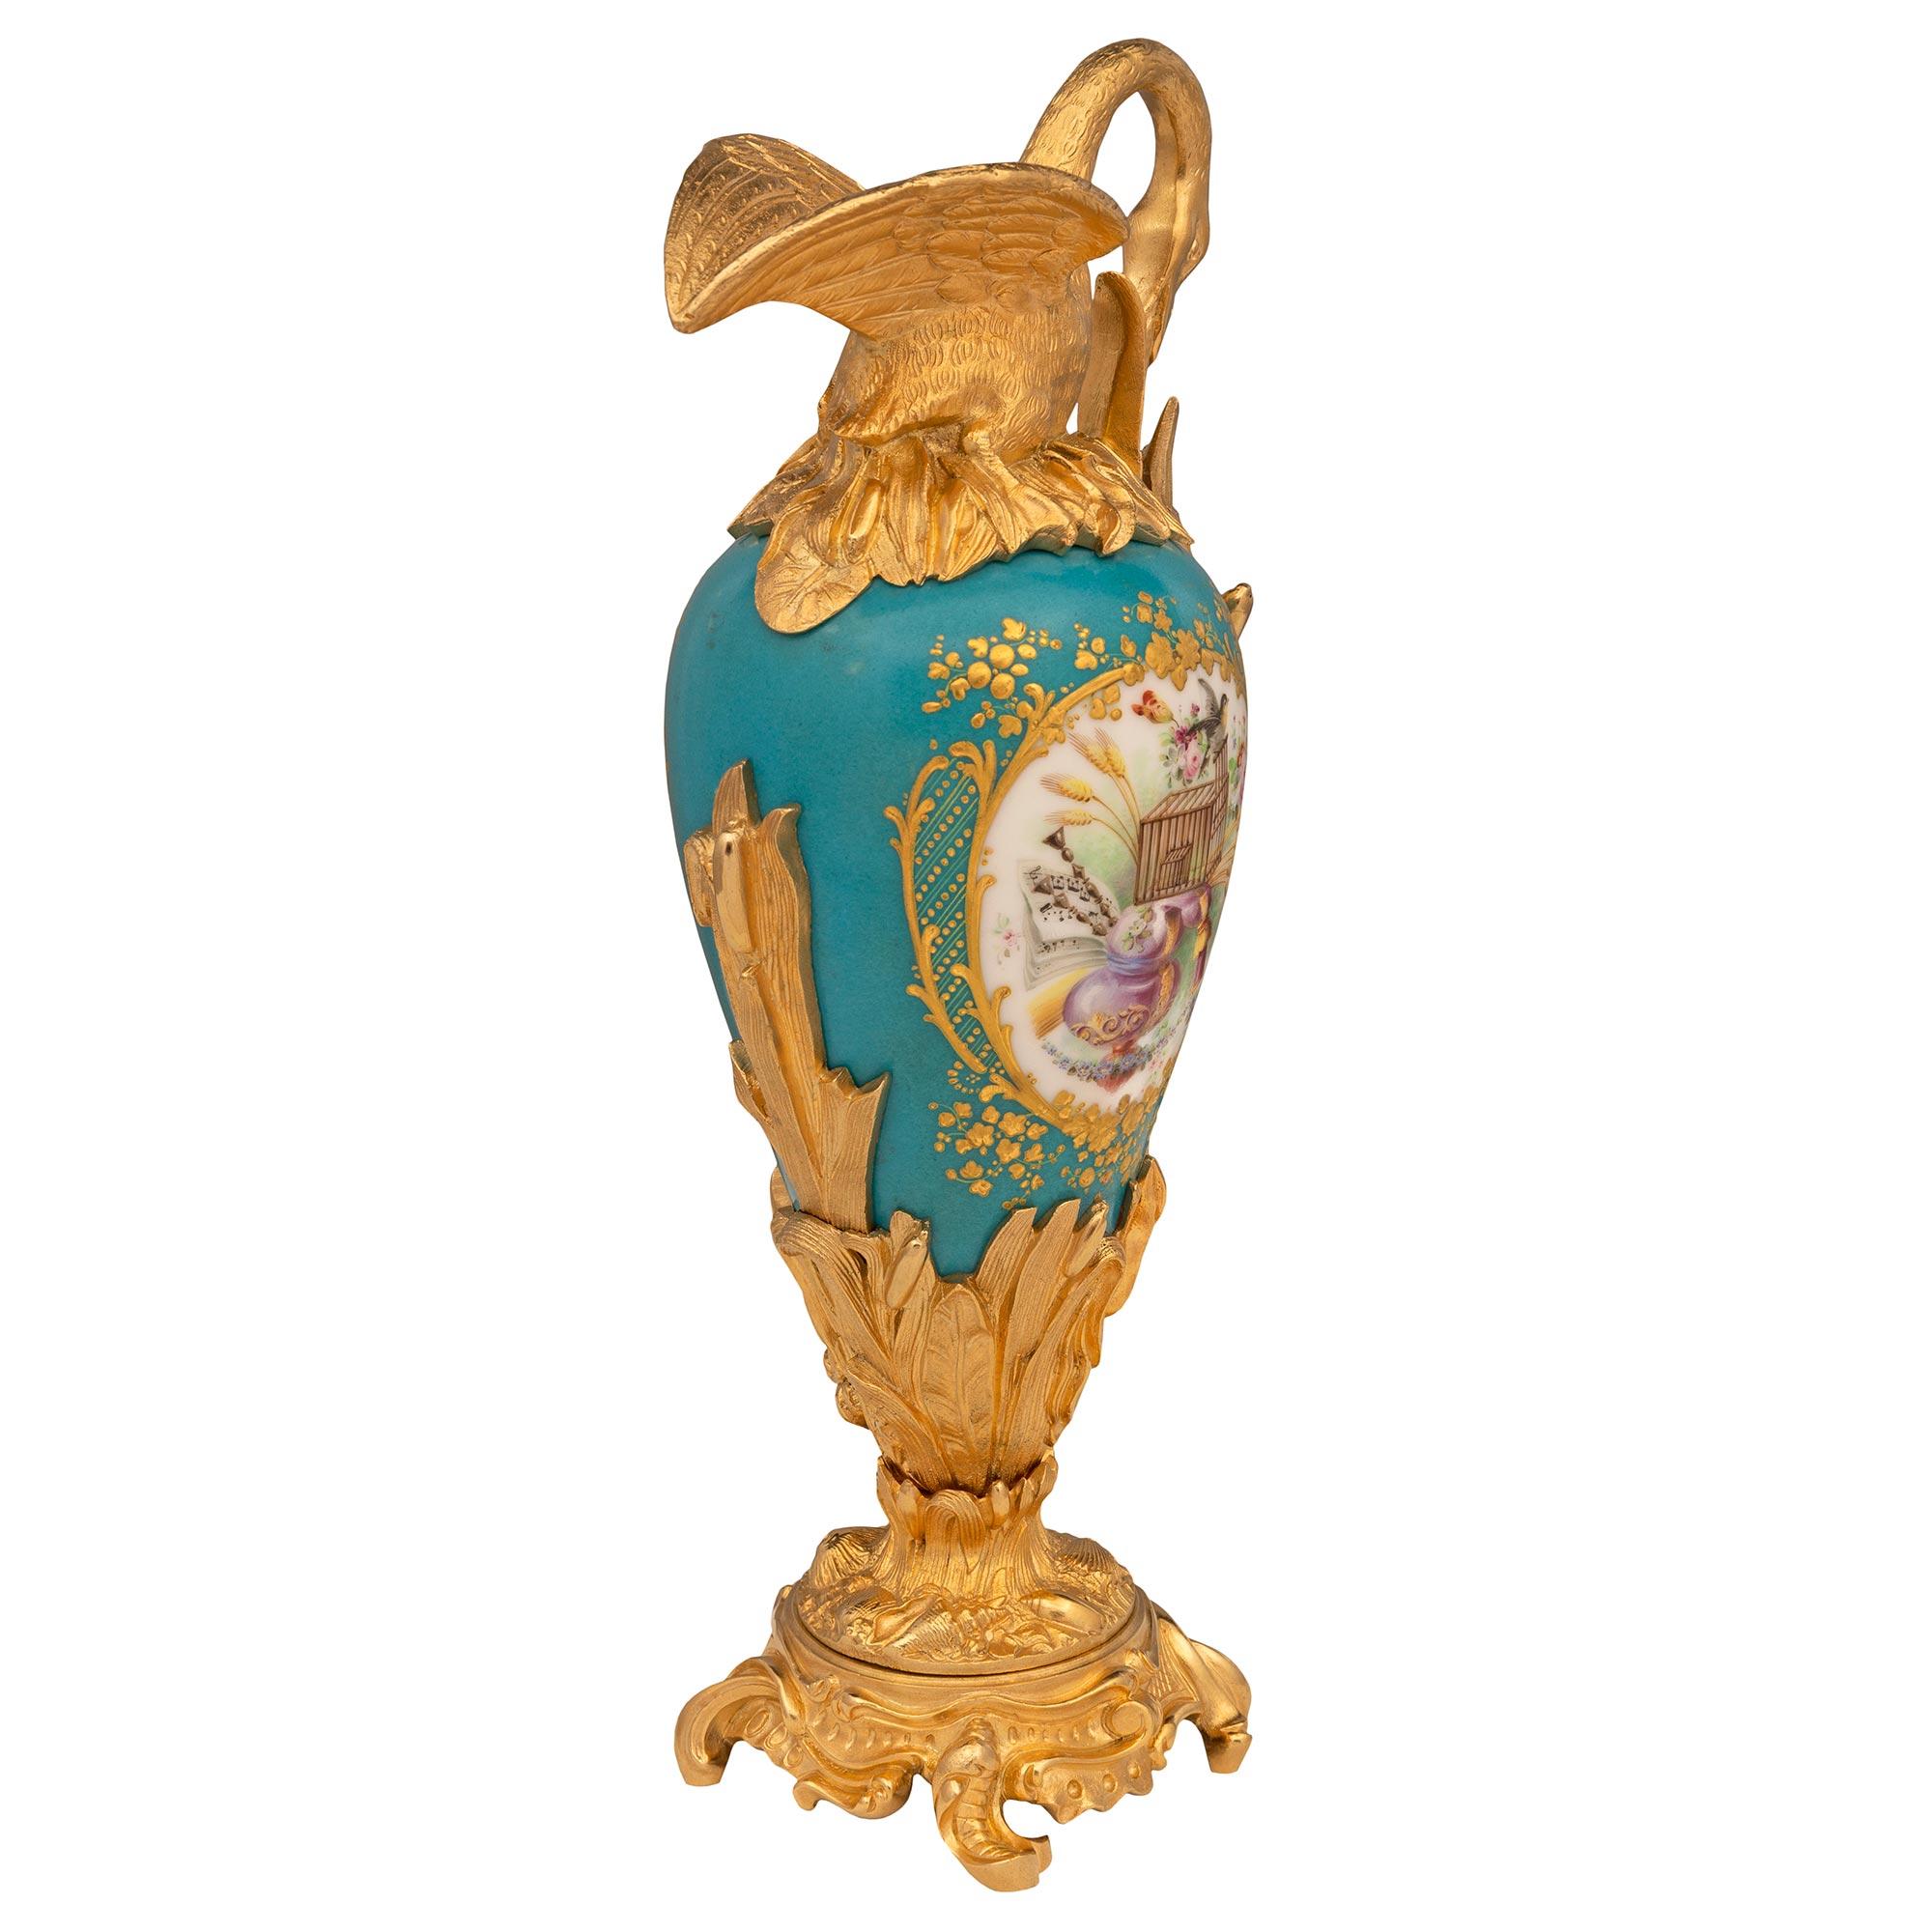 An elegant and high quality pair of French 19th century Louis XVI st. Belle Époque period Sèvres porcelain and ormolu ewers. Each ewer is raised by a striking ormolu base with unique and most decorative scrolled foliate movements, fine lattice